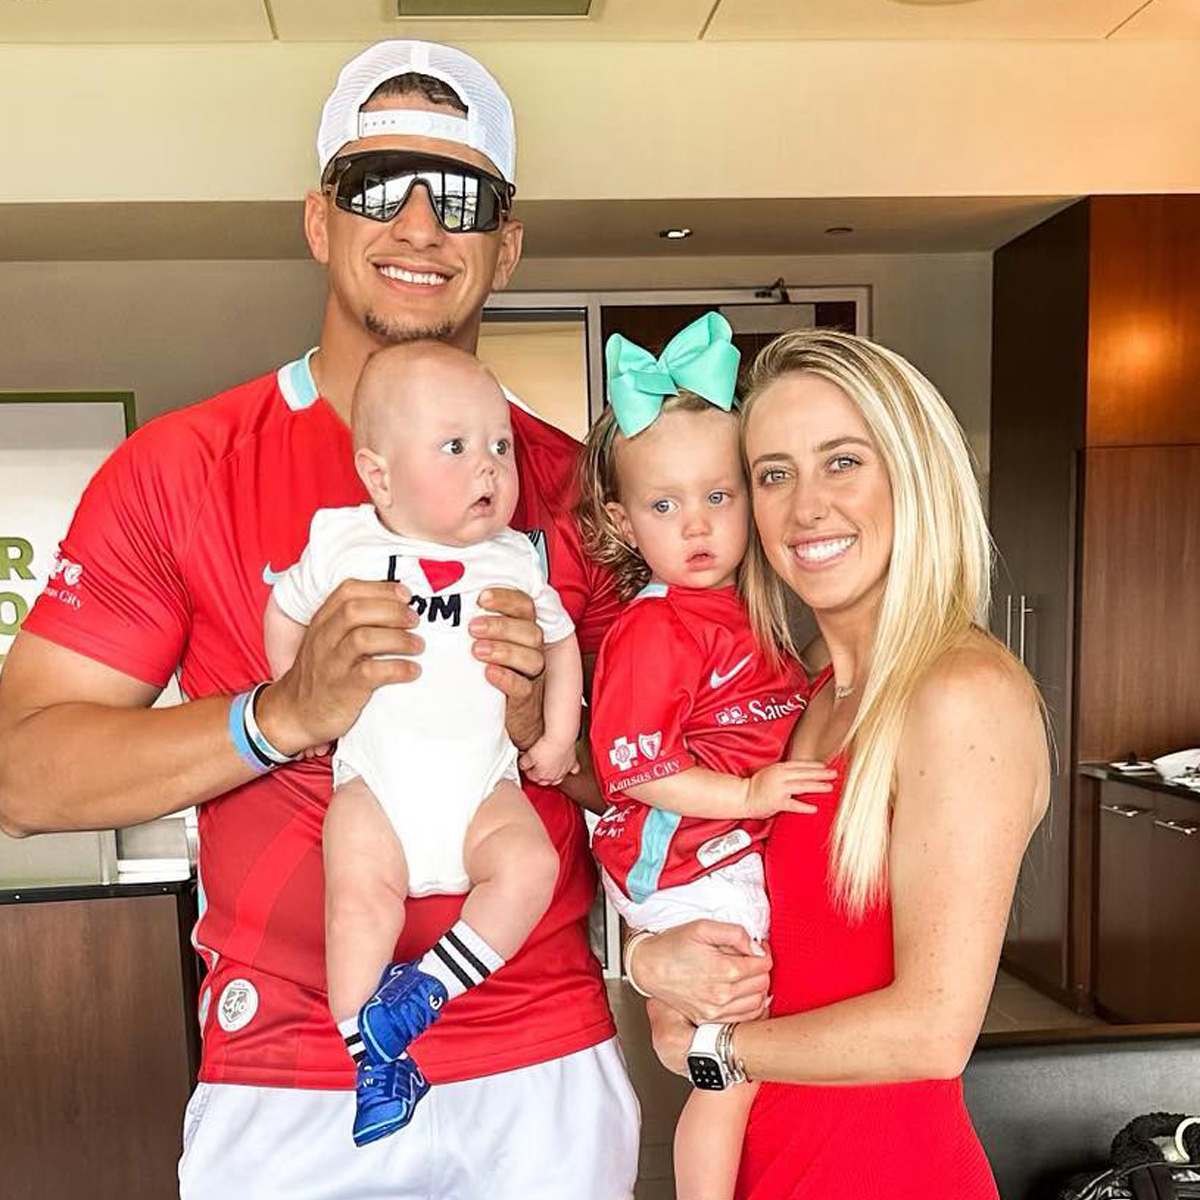 Brittany Mahomes Shares Kids Matching Outfits on Baby's First Game Day